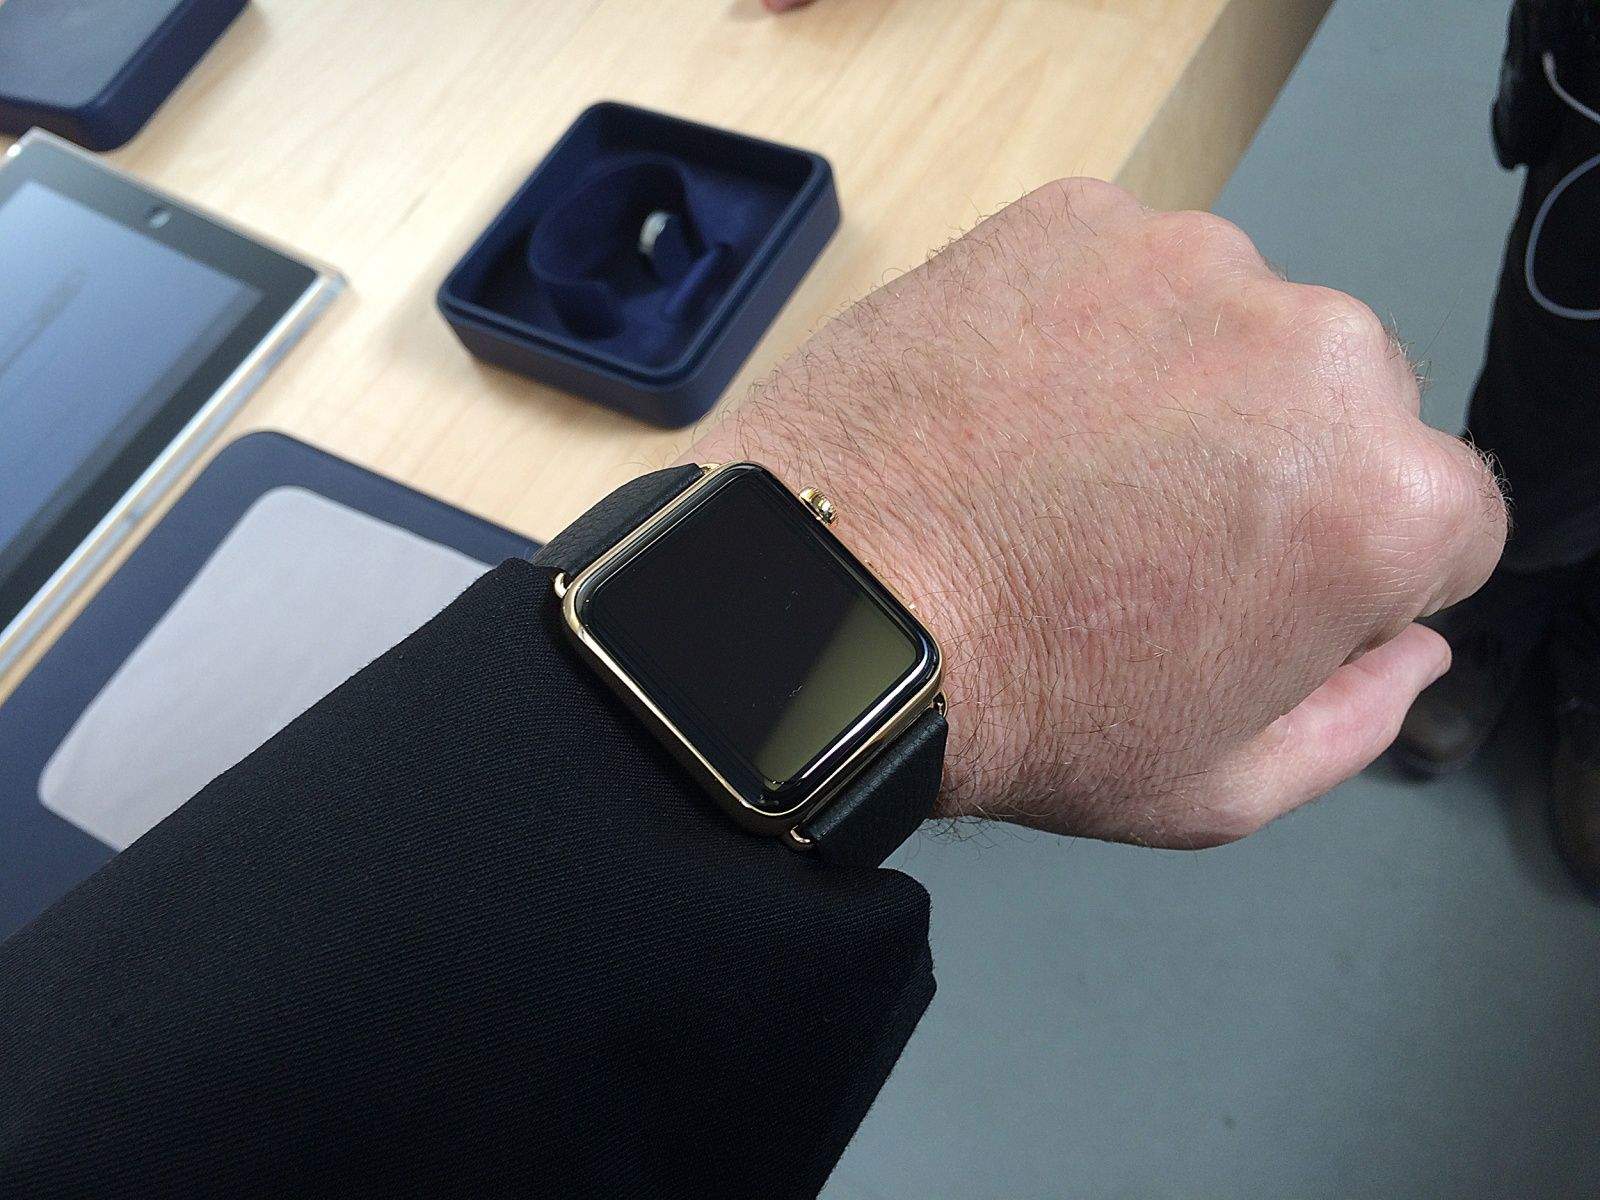 The $10,000 gold Apple Watch Edition, the first and only time I will probably every wear an expensive timepiece.